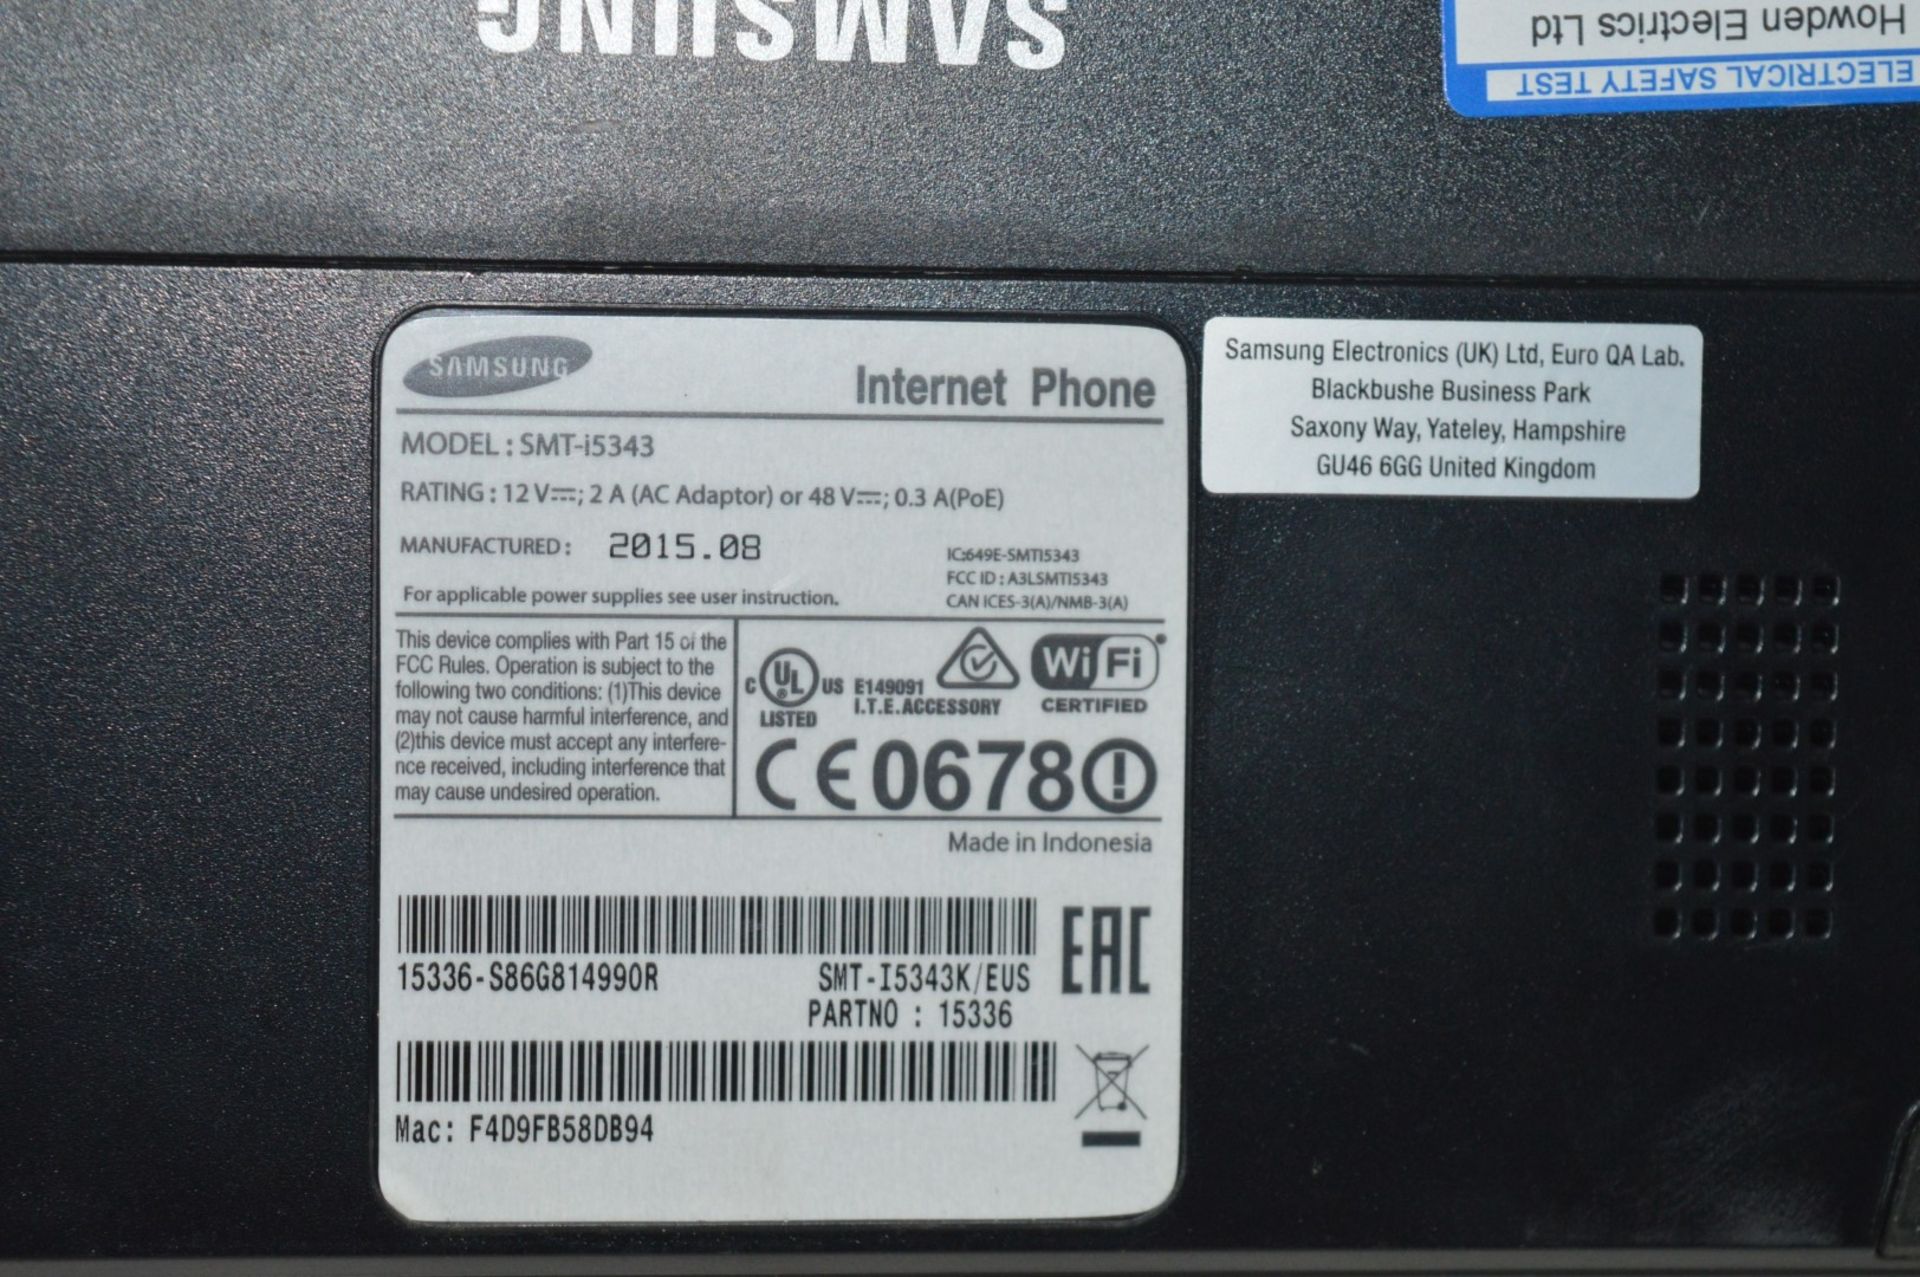 2 x Samsung SMT-i5343 IP Internet Phones with WiFi Ethernet Bluetooth & NFC - CL401 - Ref J1557/ - Image 4 of 7